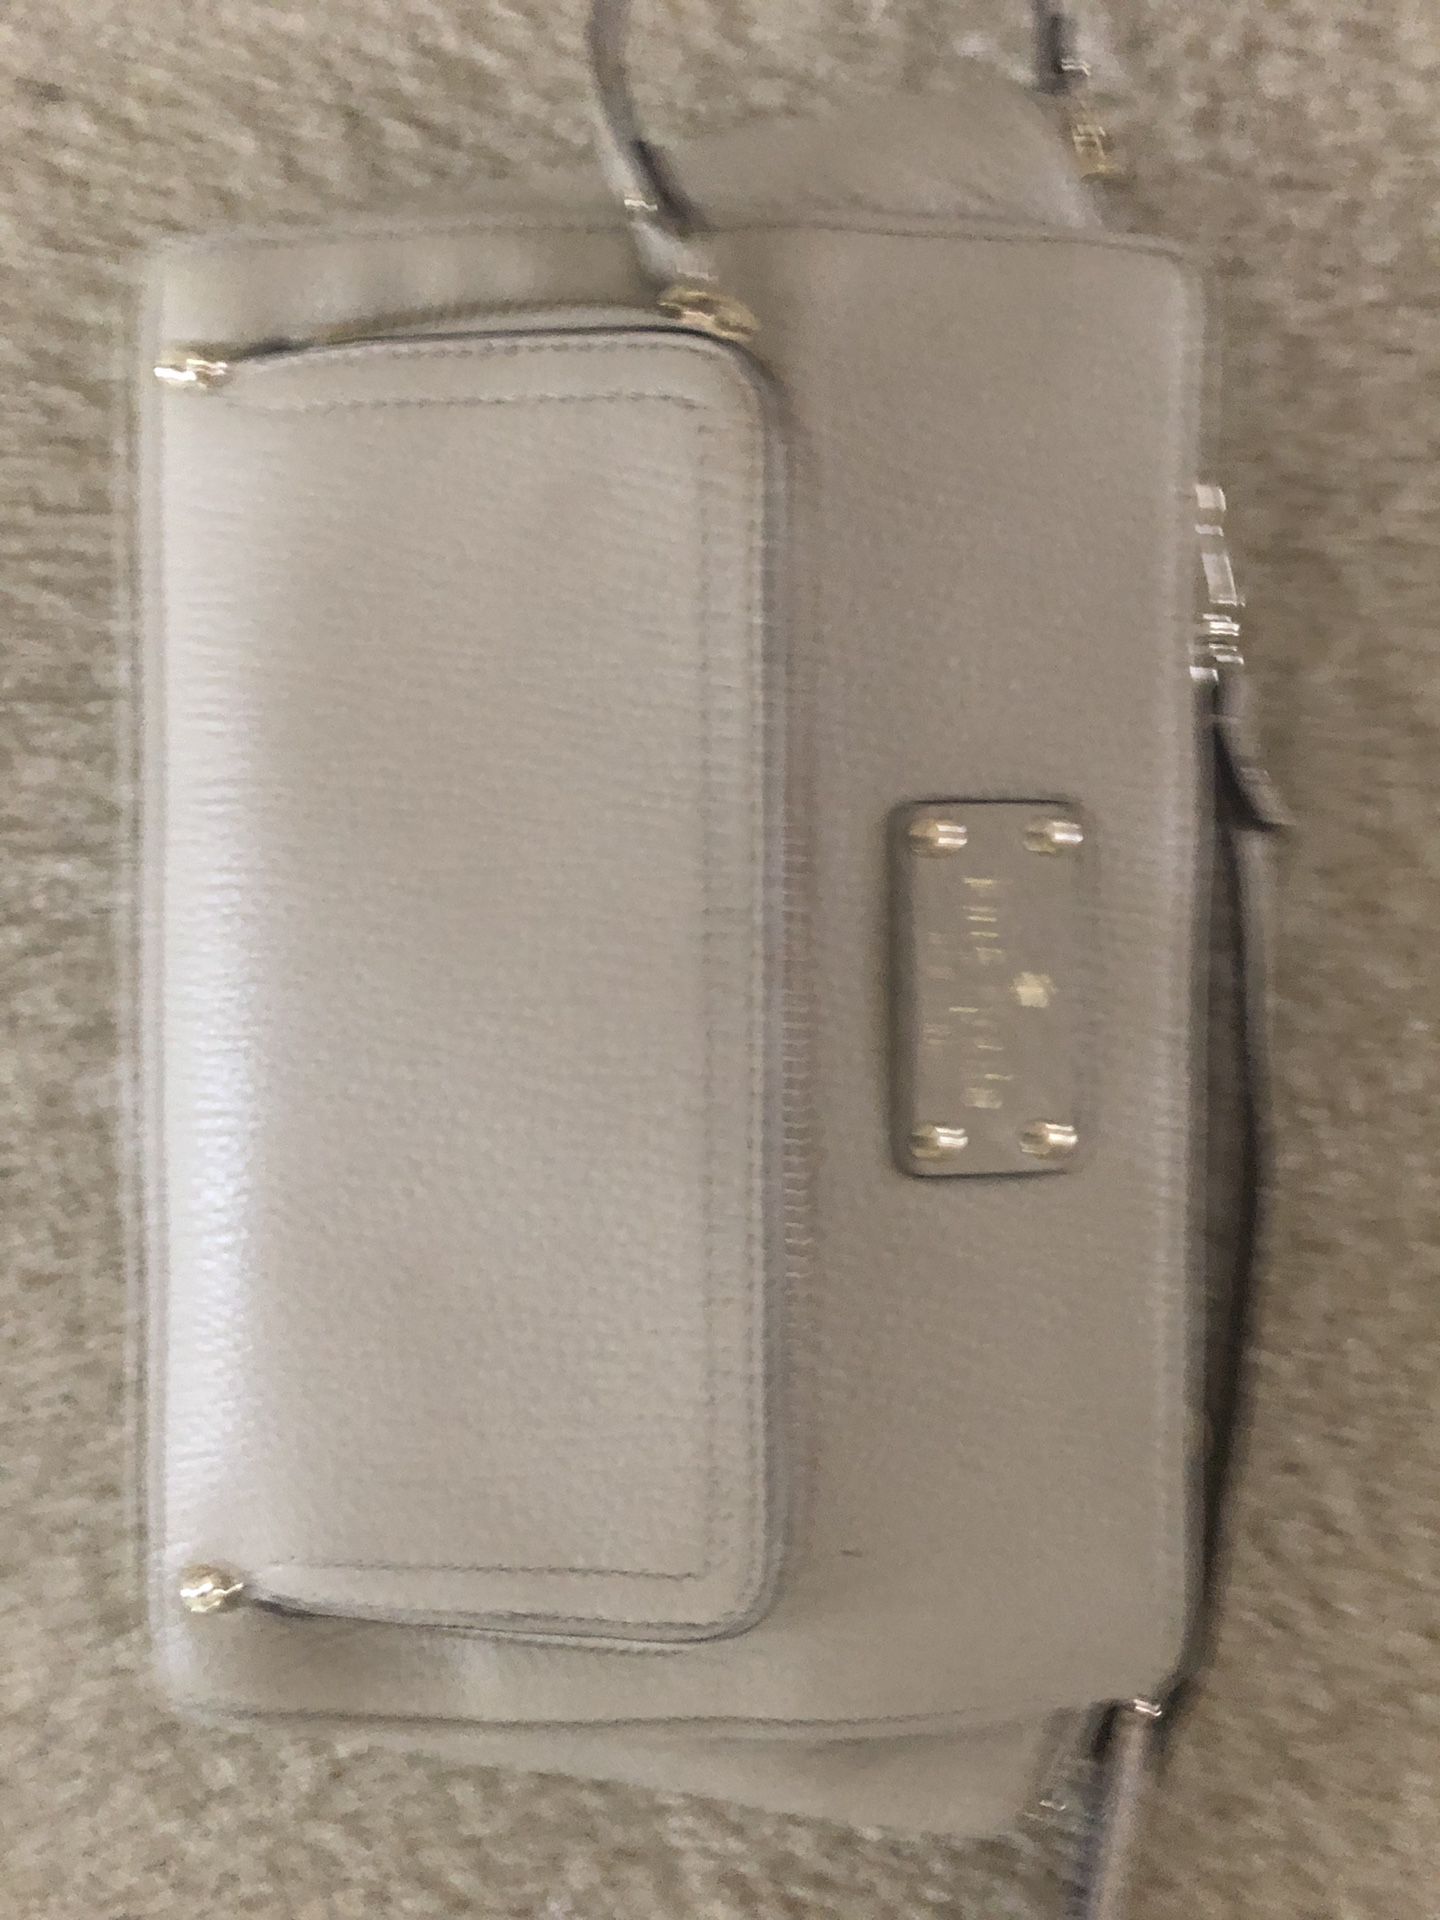 Kate spade hand bag in great condition.